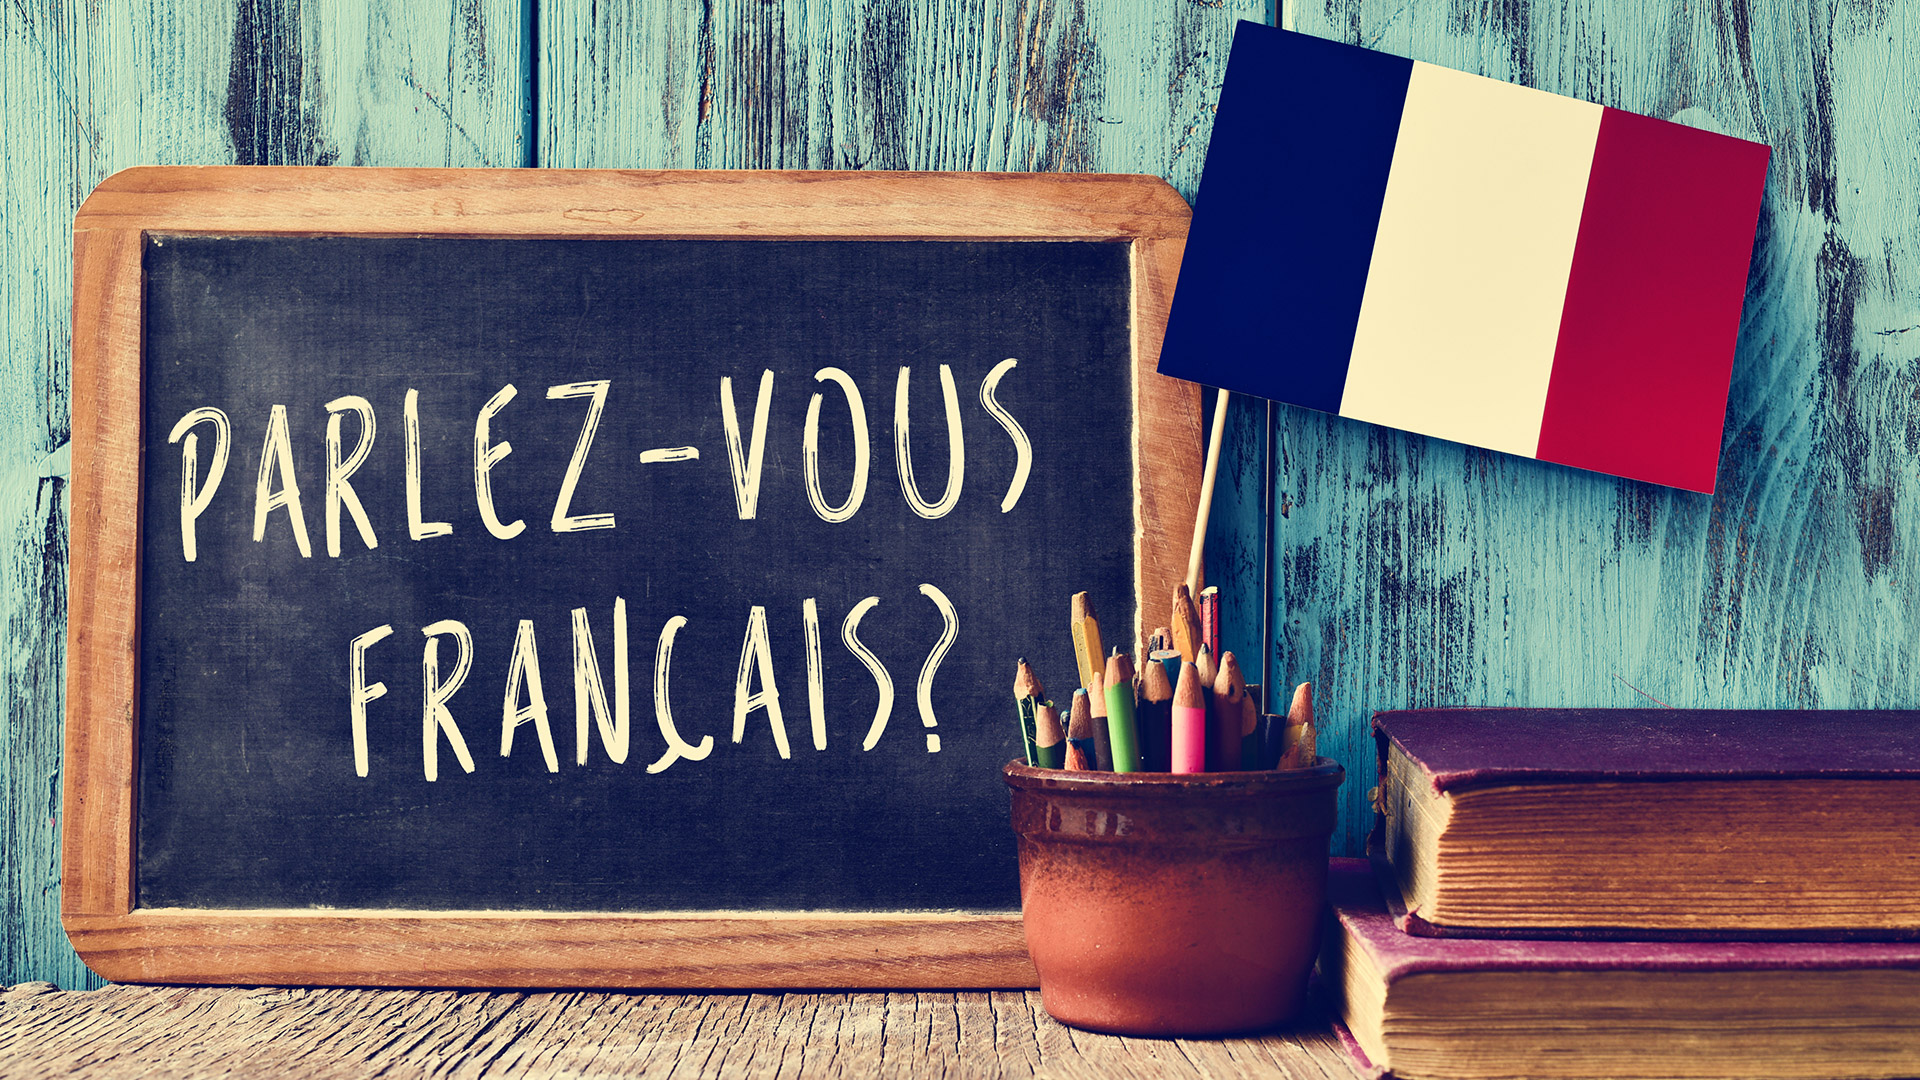 Chalk board reading Parlez-vous francais? with a cup full of pencils and the flag of France right next to it.